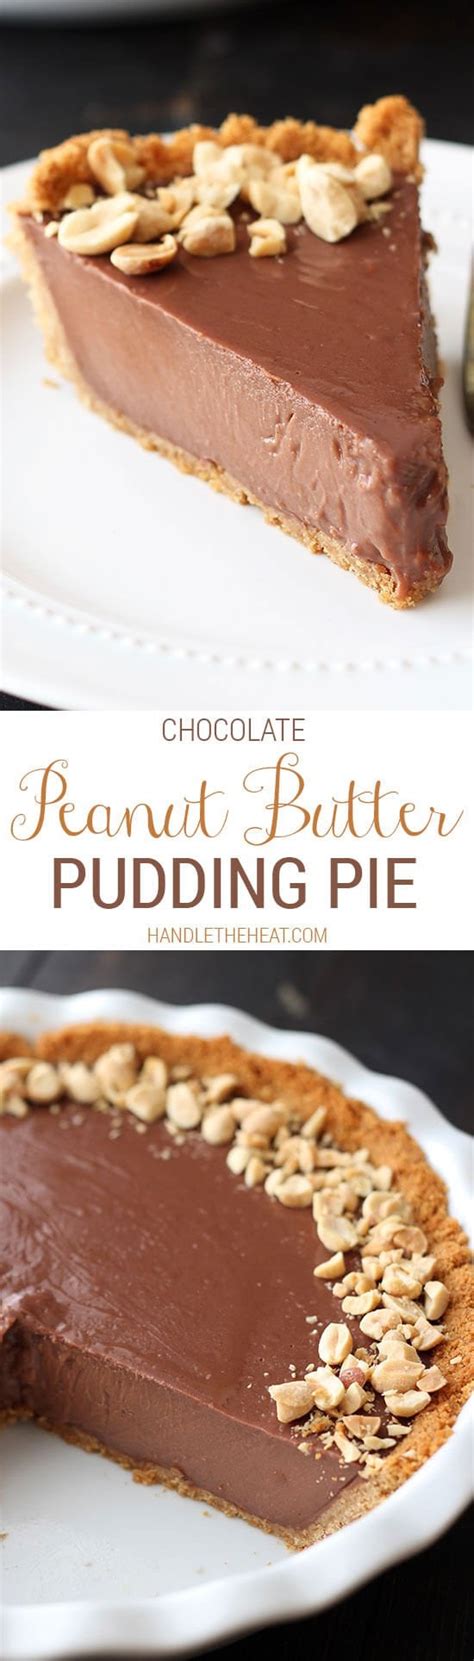 You can never go wrong with peanut butter and chocolate. Chocolate Peanut Butter Pudding Pie - Handle the Heat